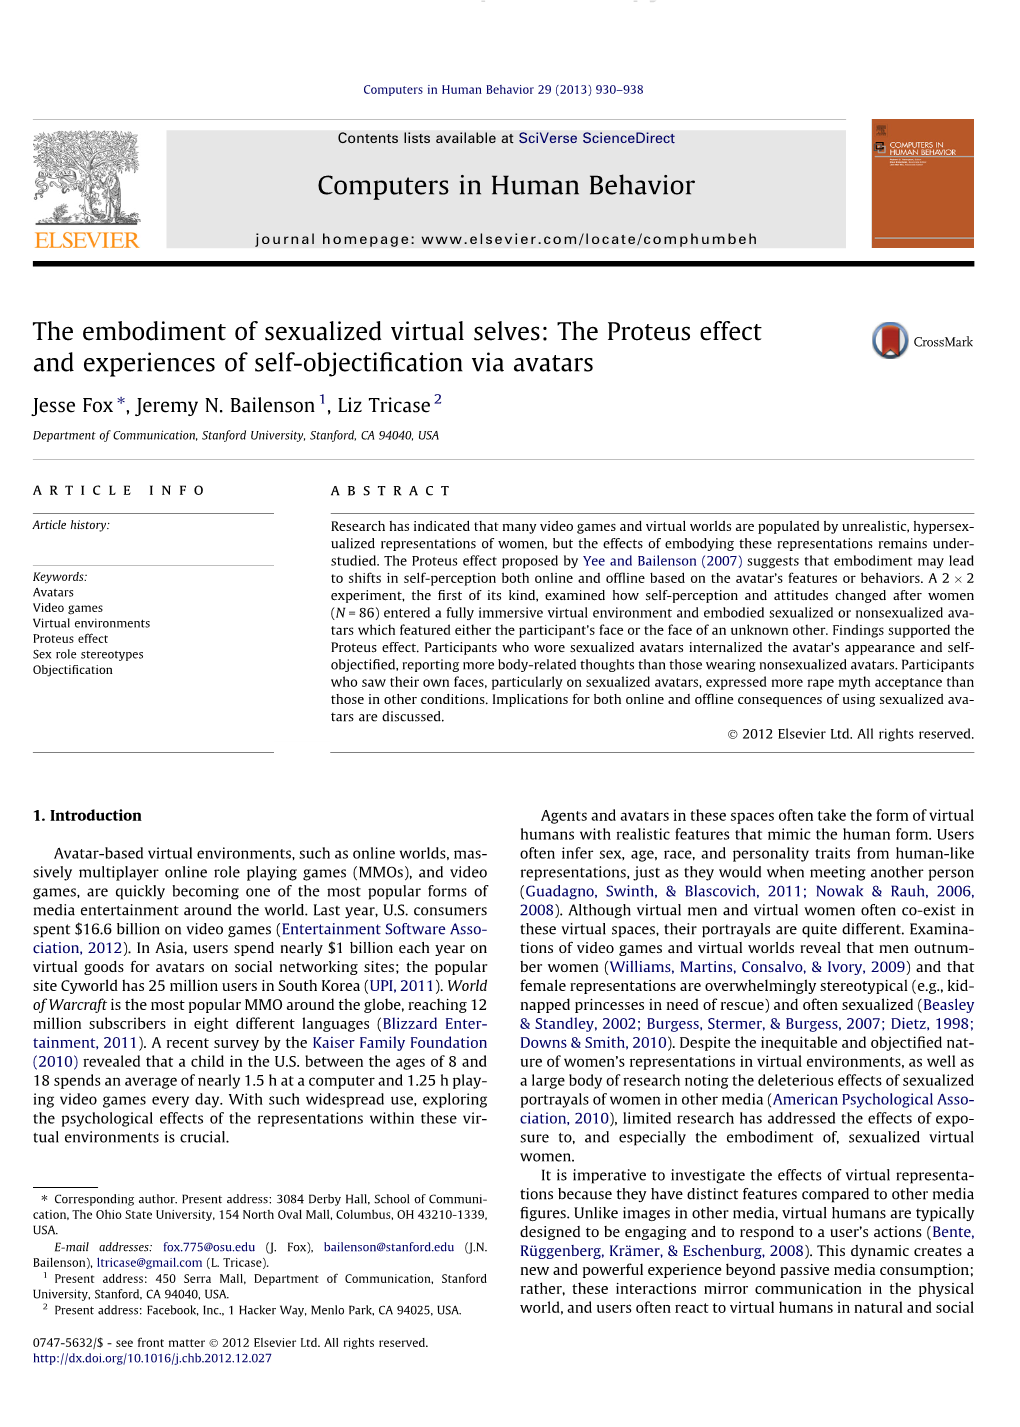 The Embodiment of Sexualized Virtual Selves: the Proteus Effect and Experiences of Self-Objectiﬁcation Via Avatars ⇑ Jesse Fox , Jeremy N